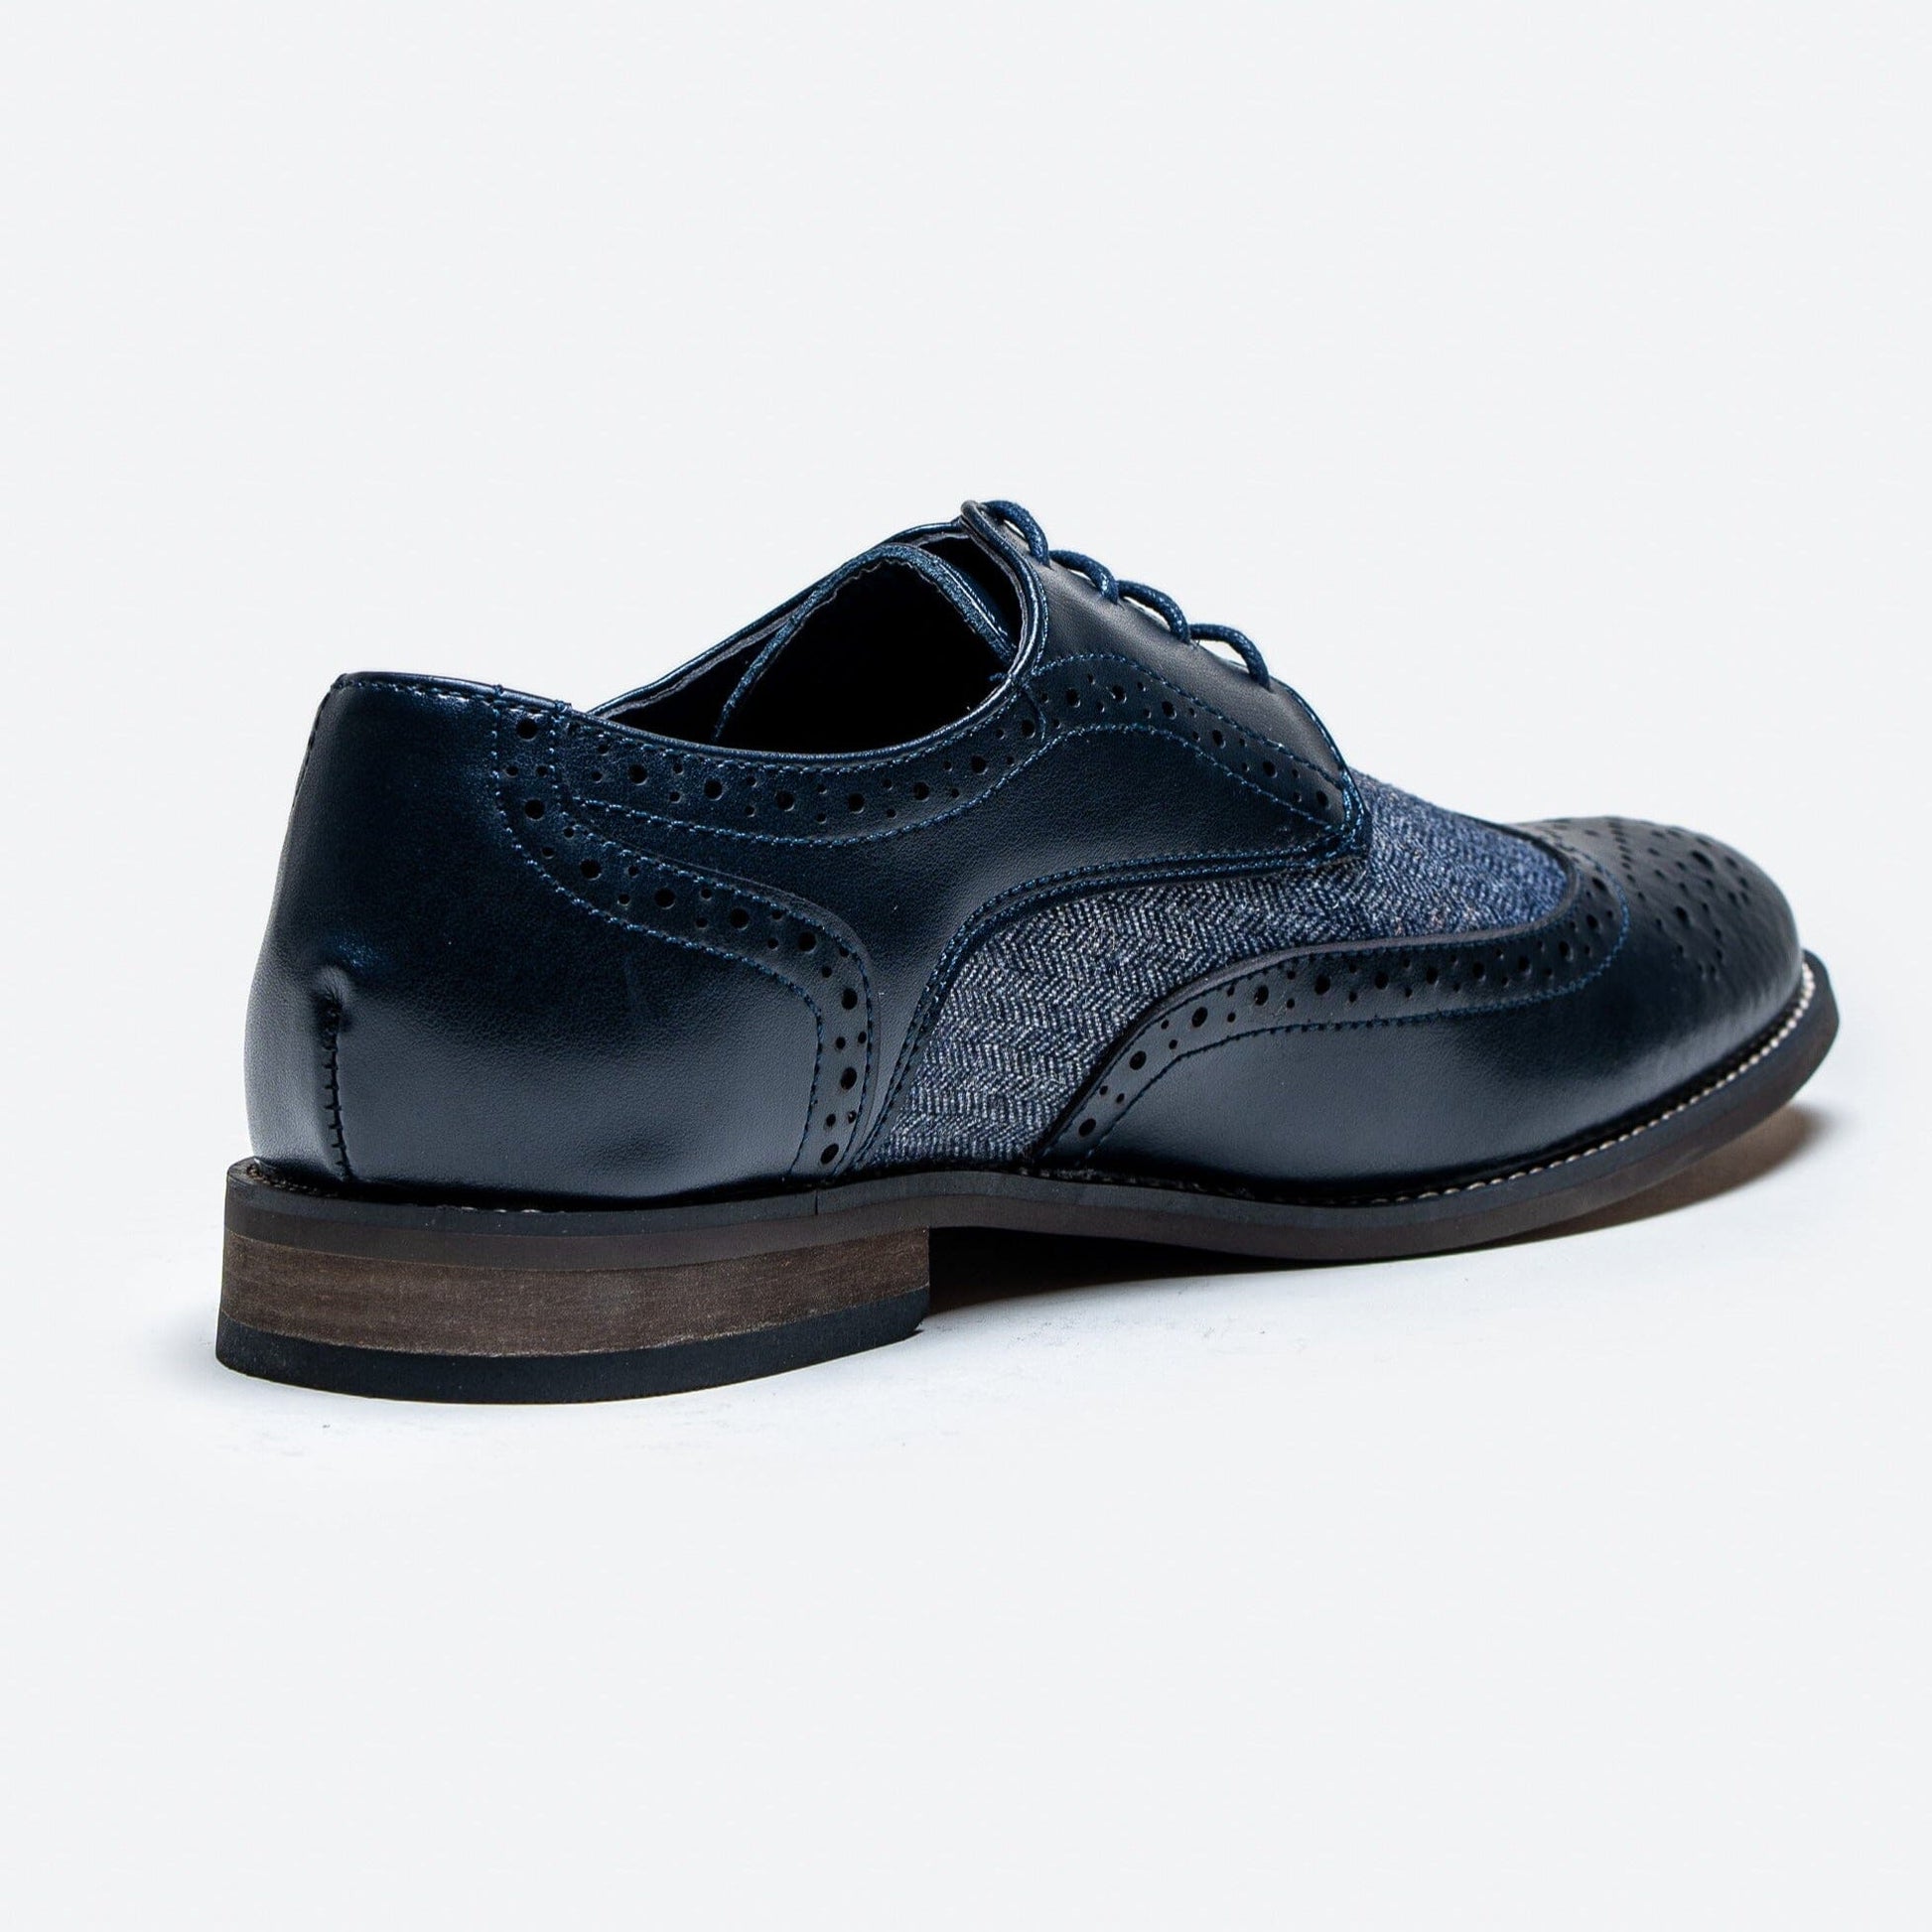 Oliver Navy Tweed Shoes - Shoes - - THREADPEPPER